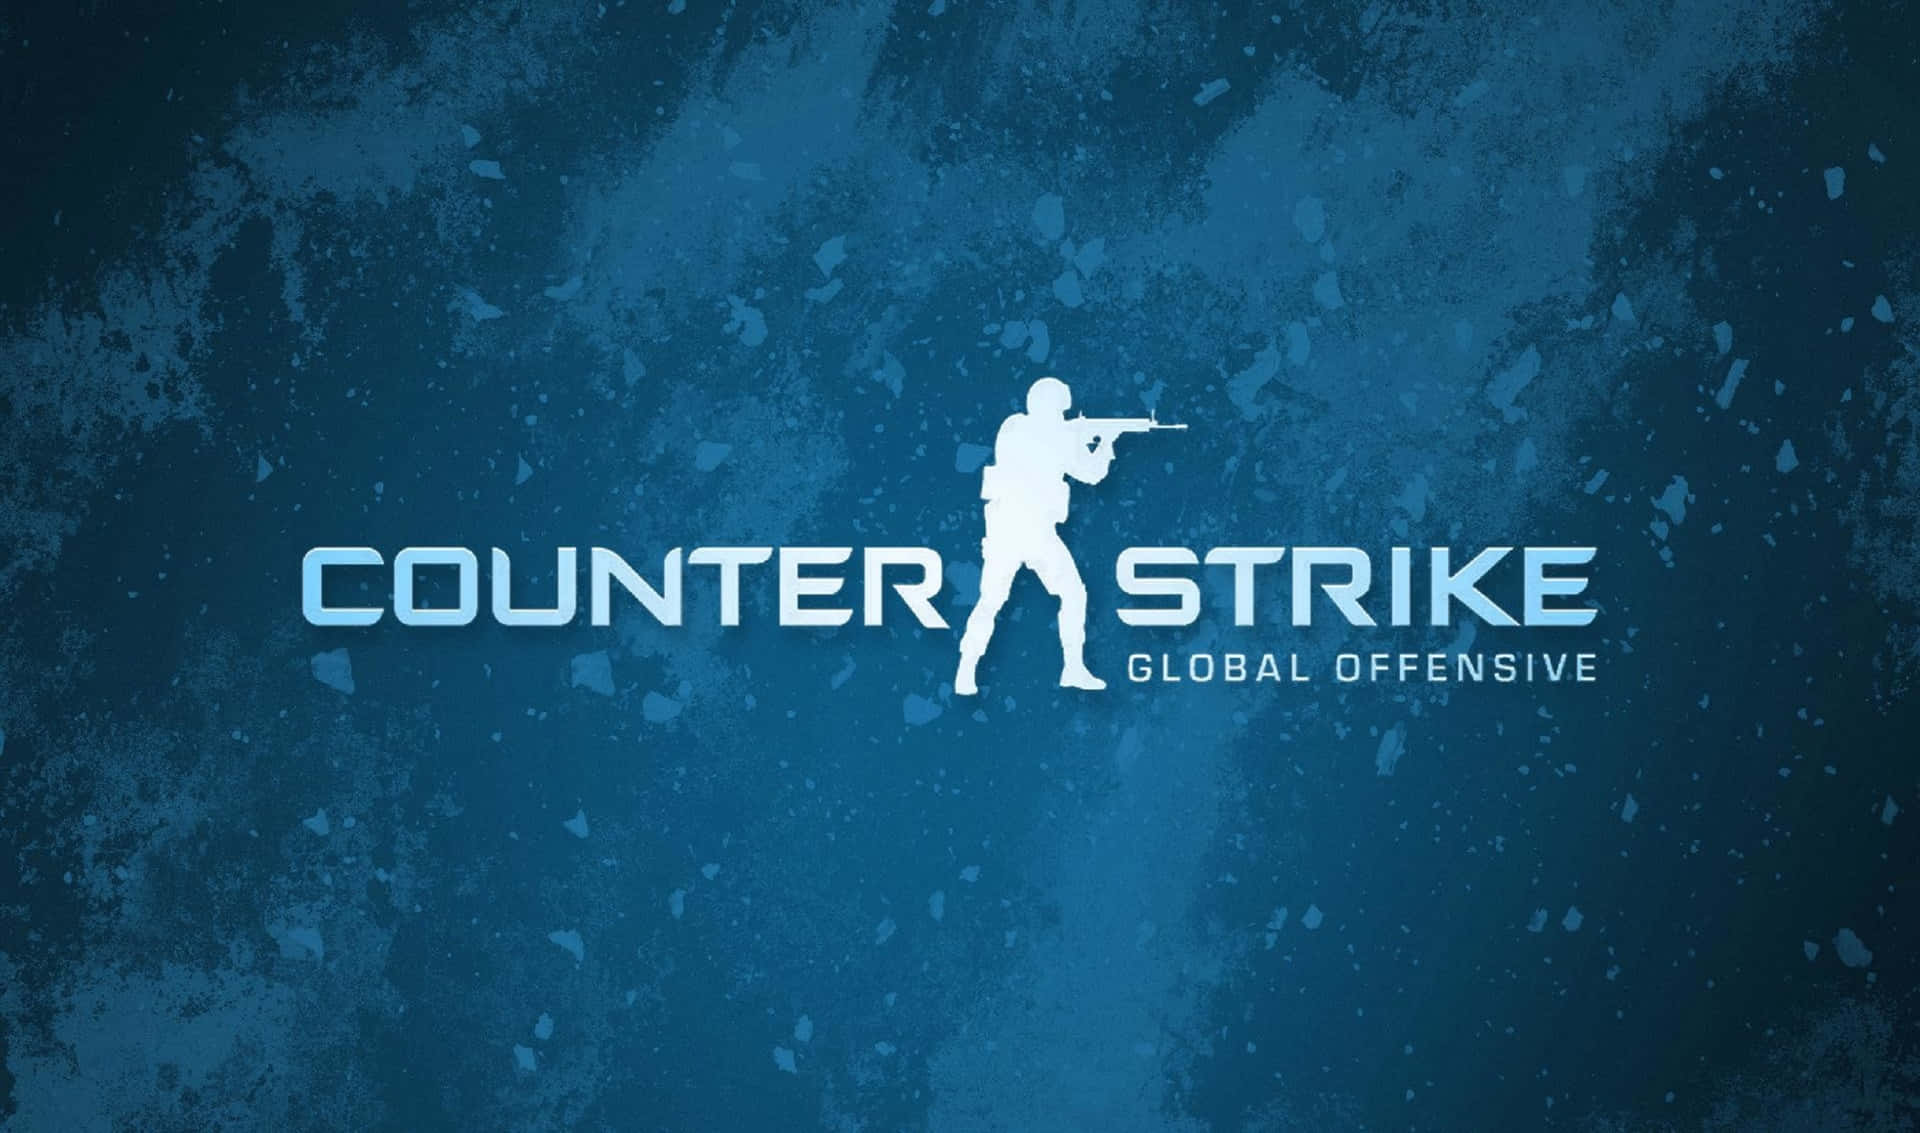 Professional Players Compete Intensely in Counter-Strike Global Offensive